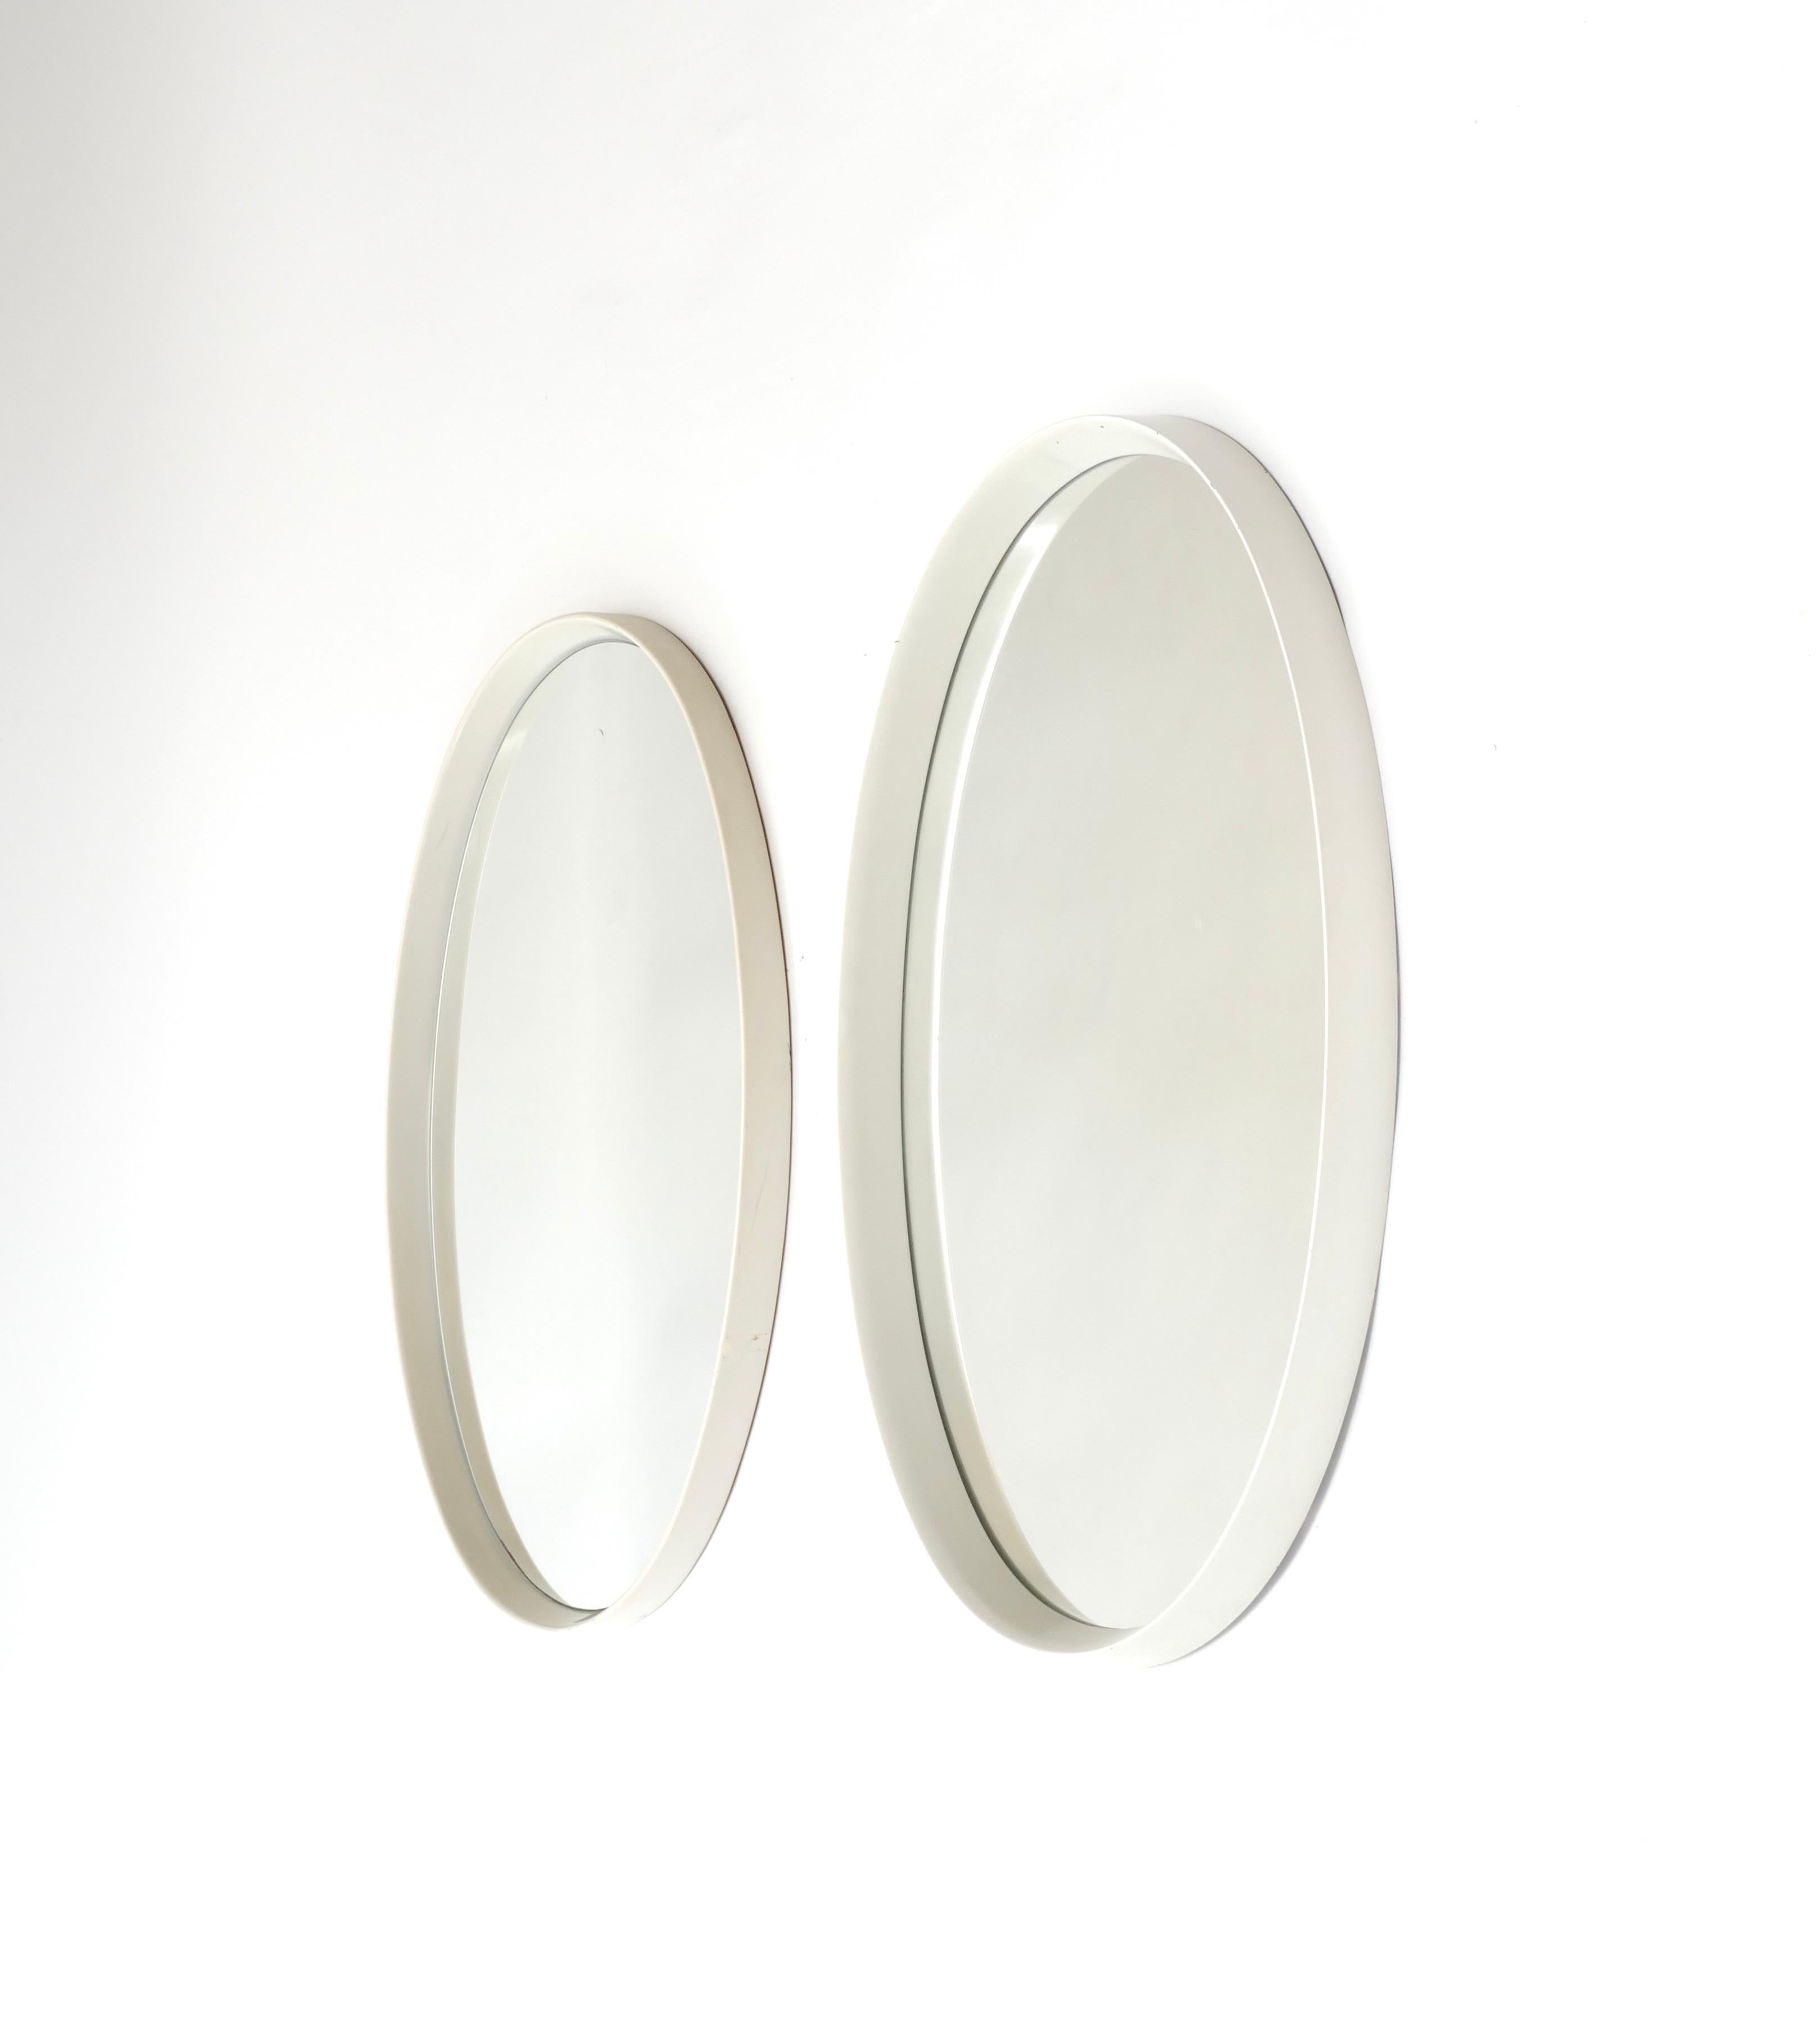 Set of two oval mirrors with a wood white lacquered frame, Germany, 1970s
One 79cms high, 49 cms wide, 5.5 cms deep
The other 78cms high, 50.5 cms wide, 4 cms deep.